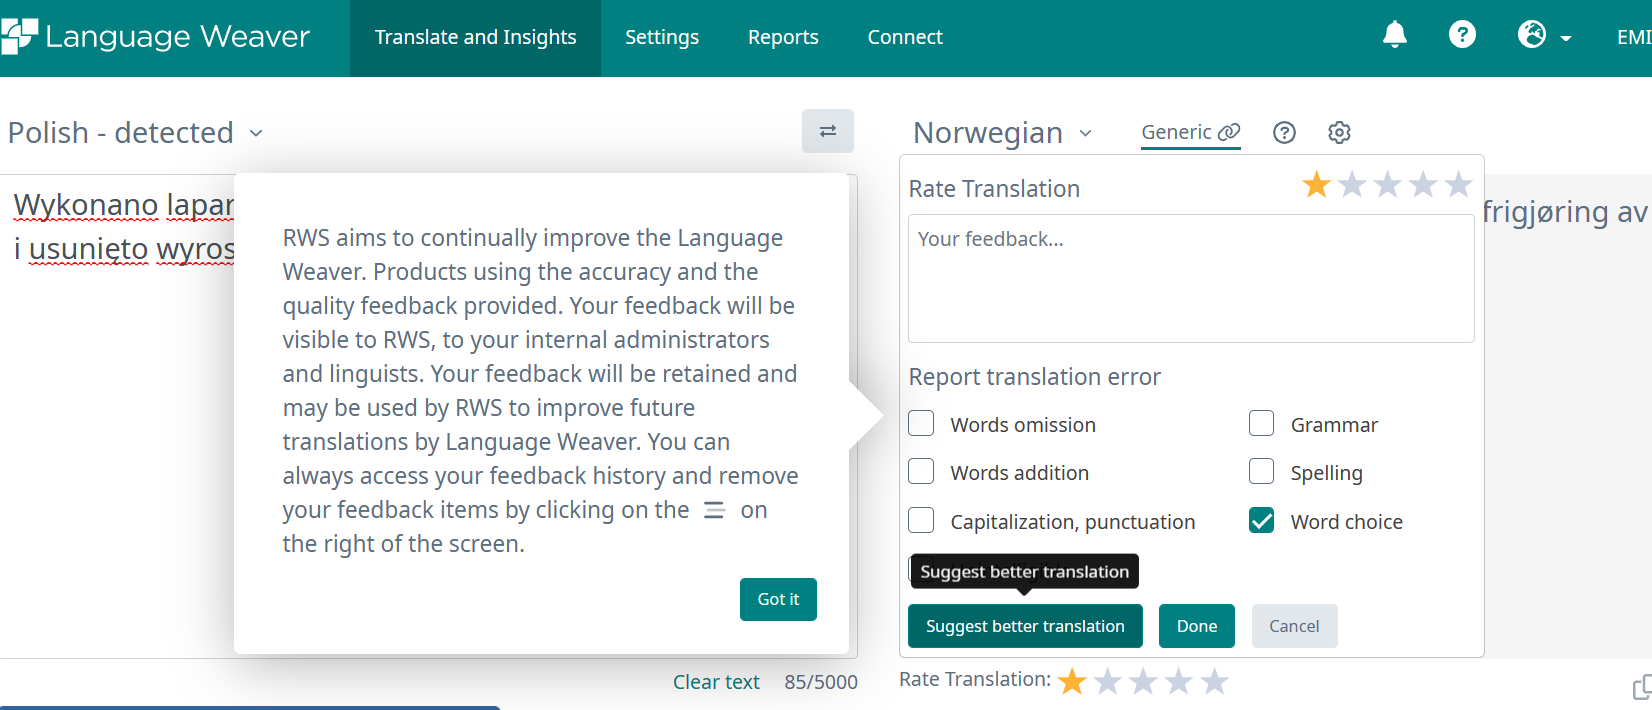 Language Weaver interface showing a message about improving translations and a feedback form with options for rating and reporting translation errors.